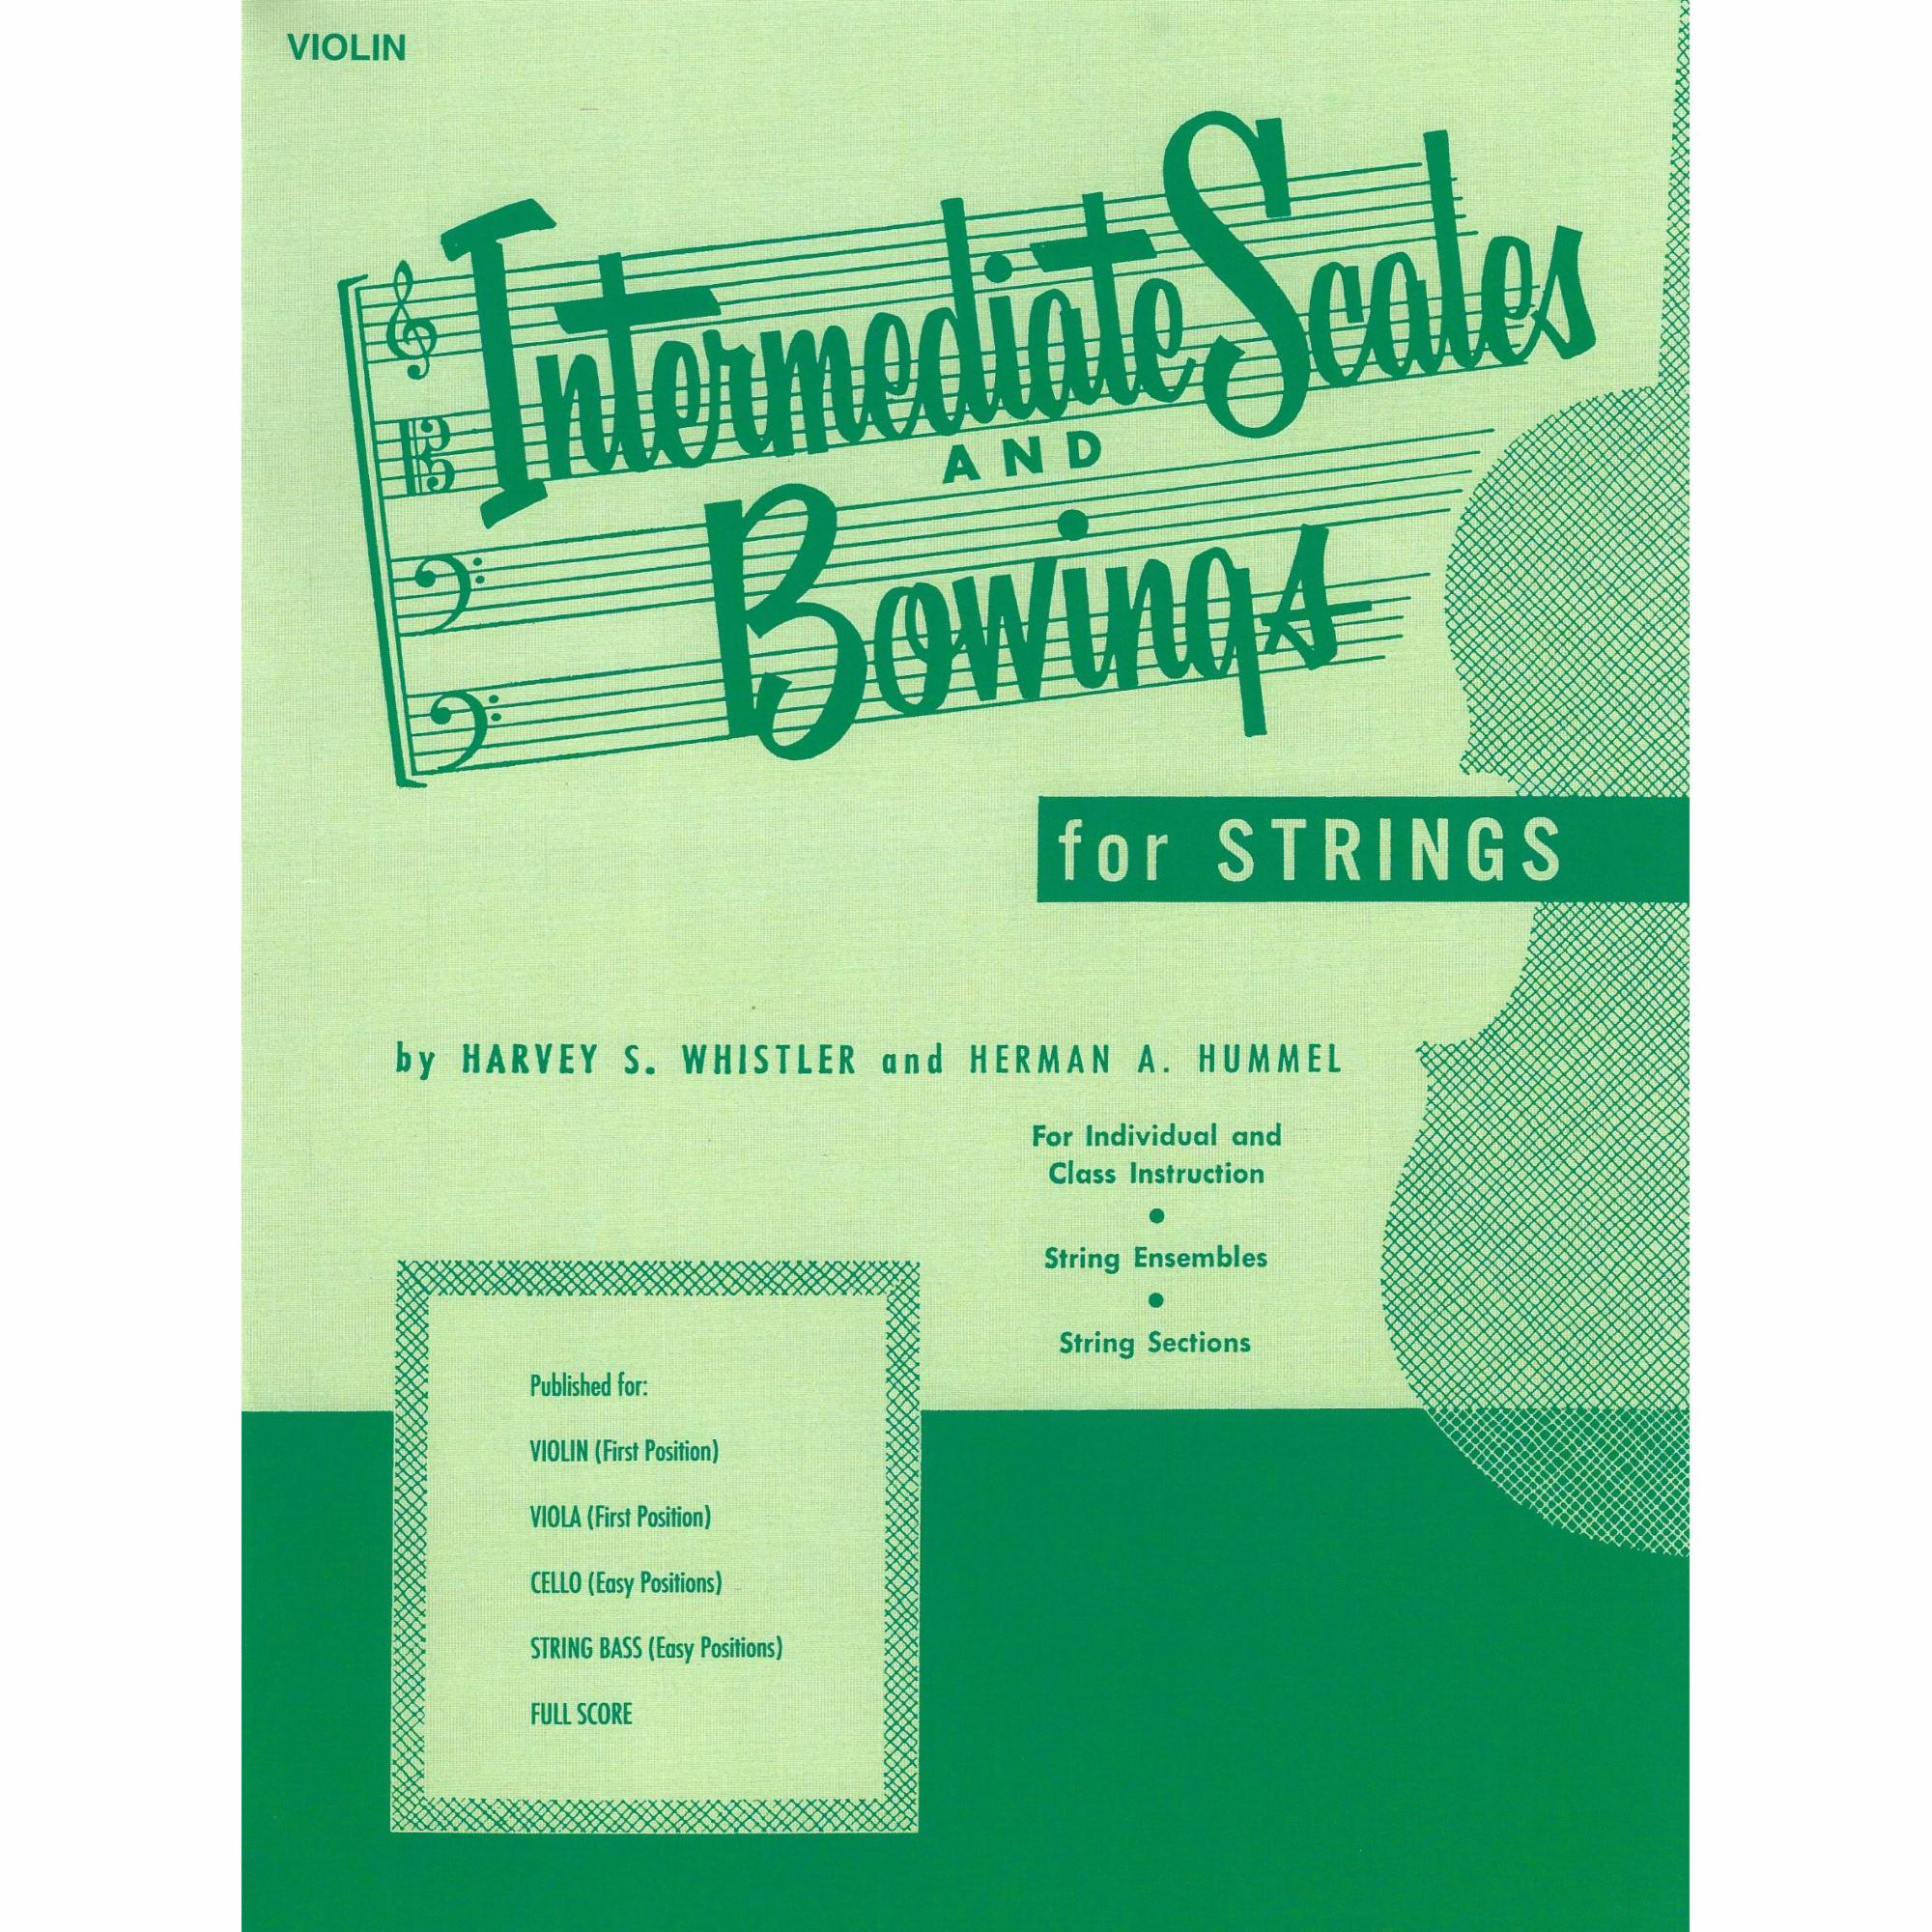 Intermediate Scales and Bowings for Violin